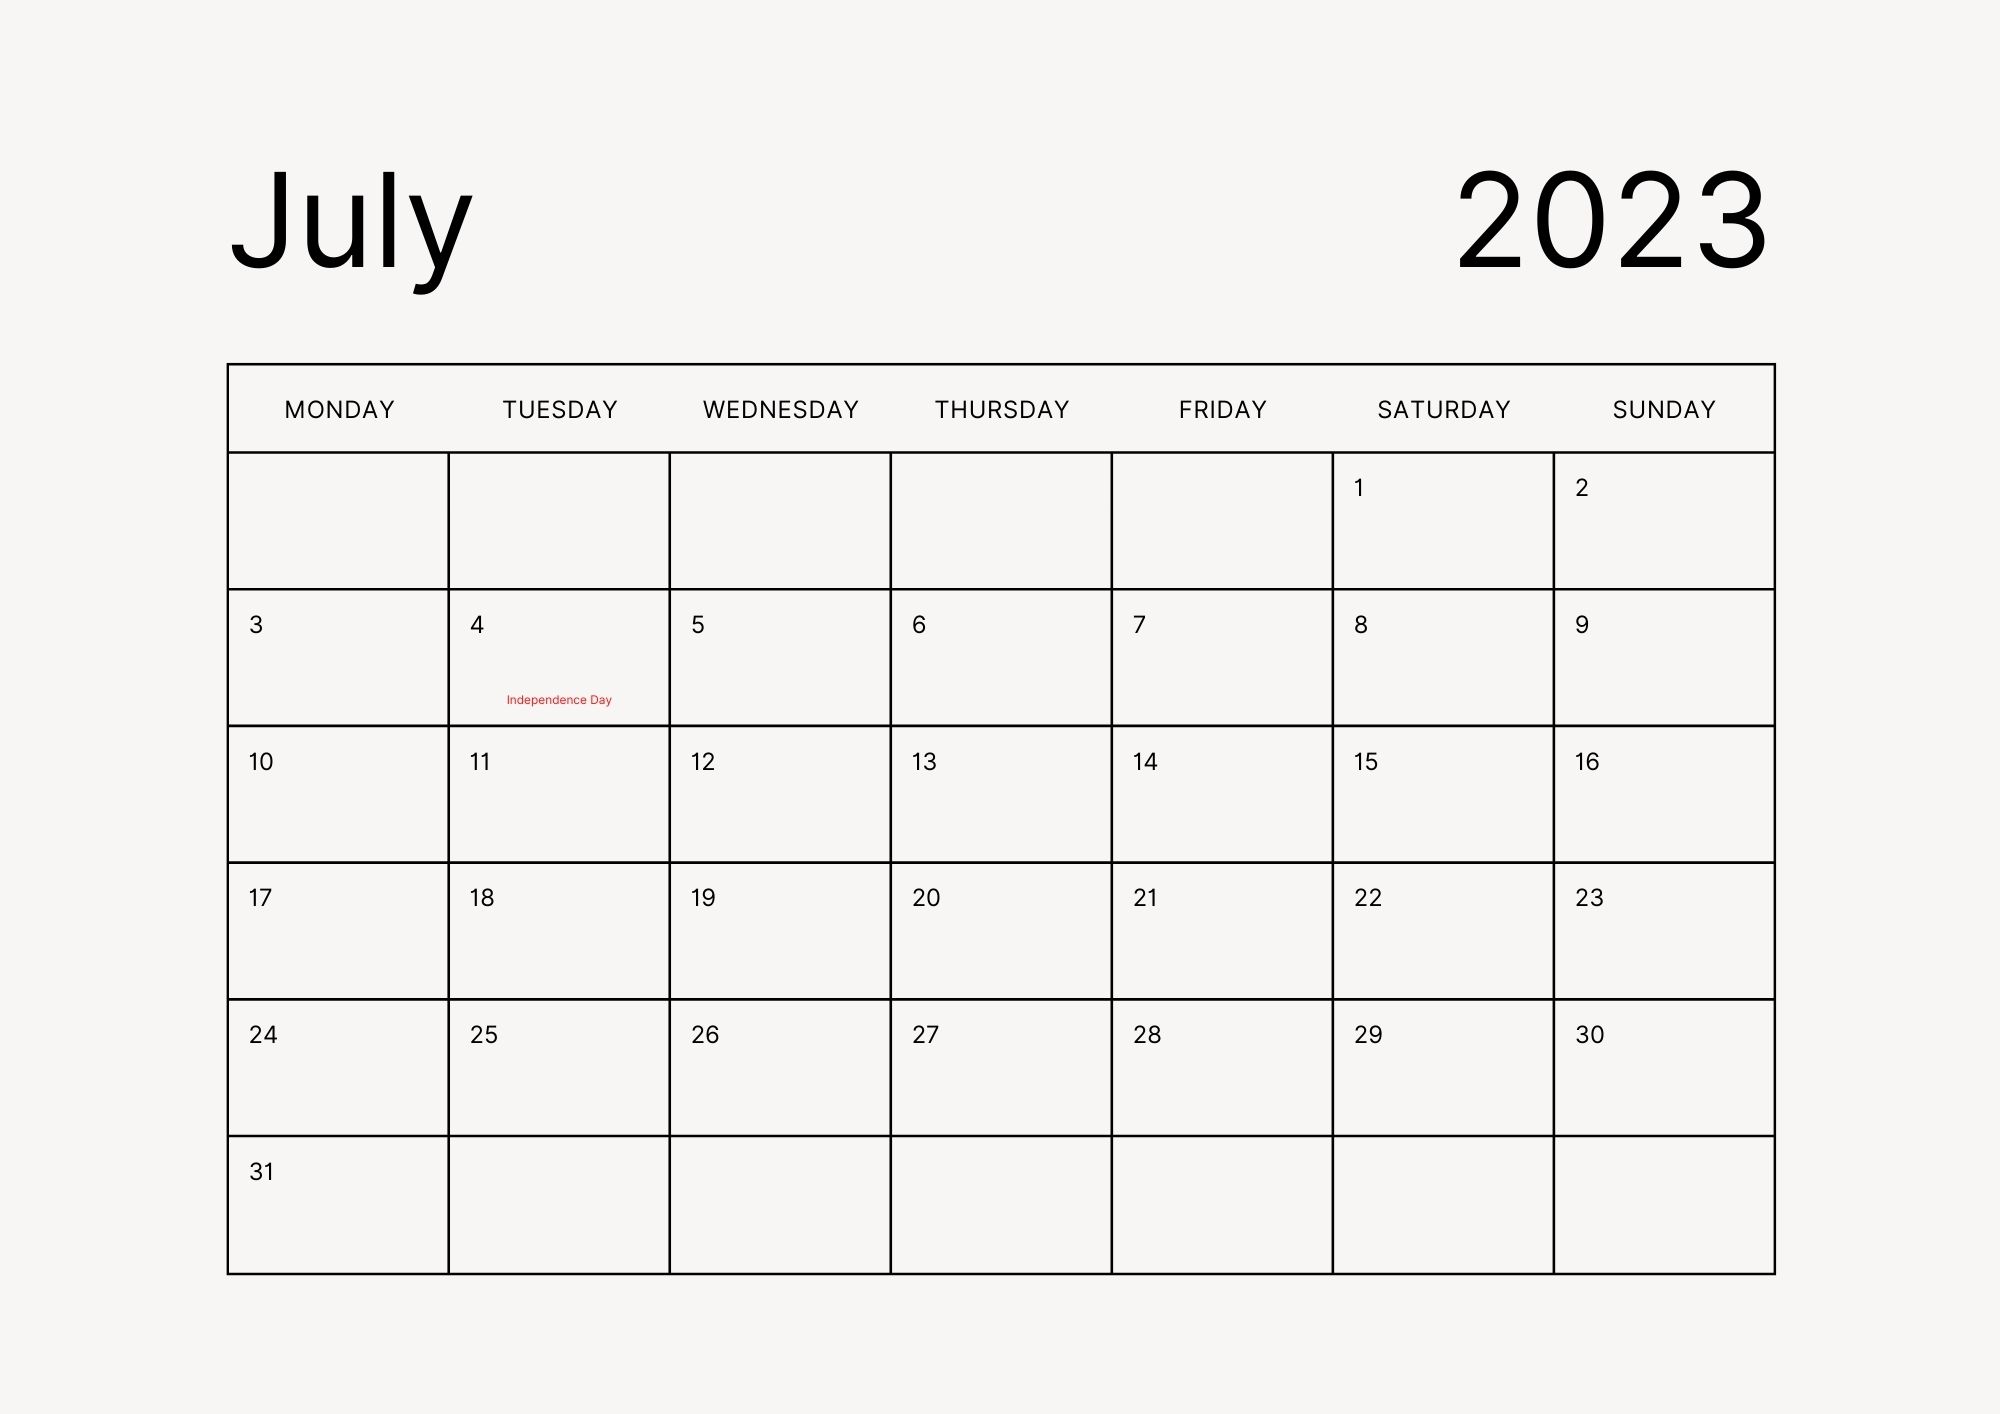 July Calendar 2023 With Holidays